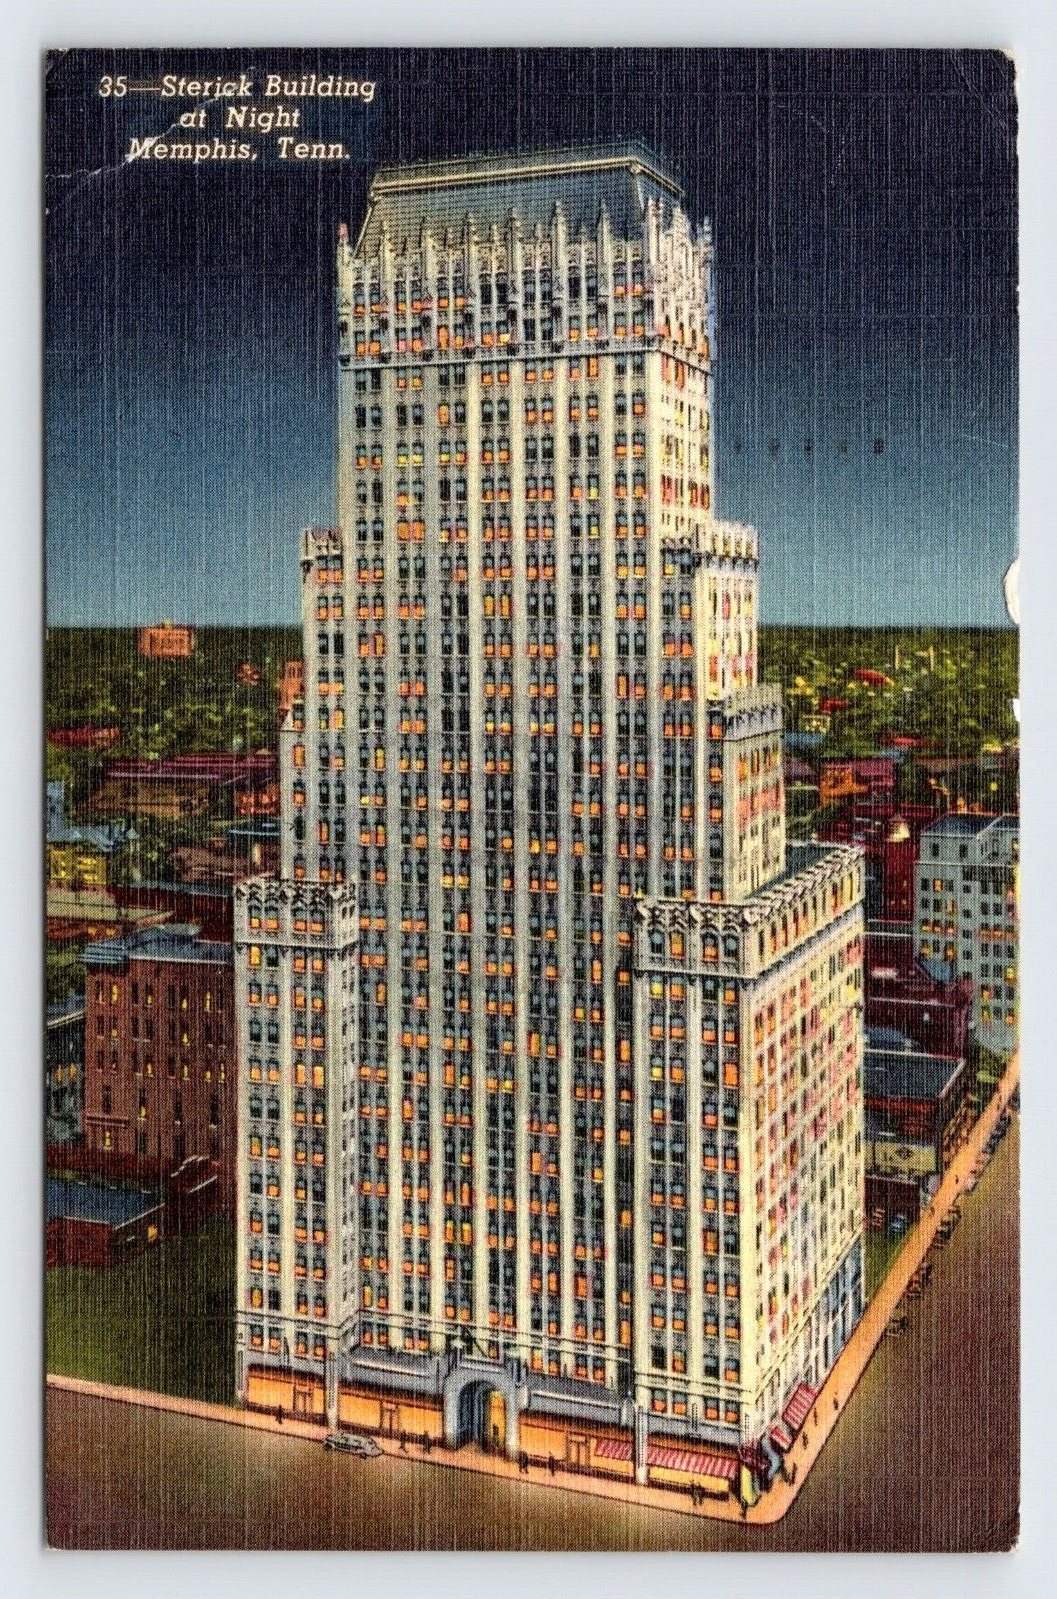 Sterick Building at Night, Memphis Tennessee Vintage Linen Nighttime Postcard P2